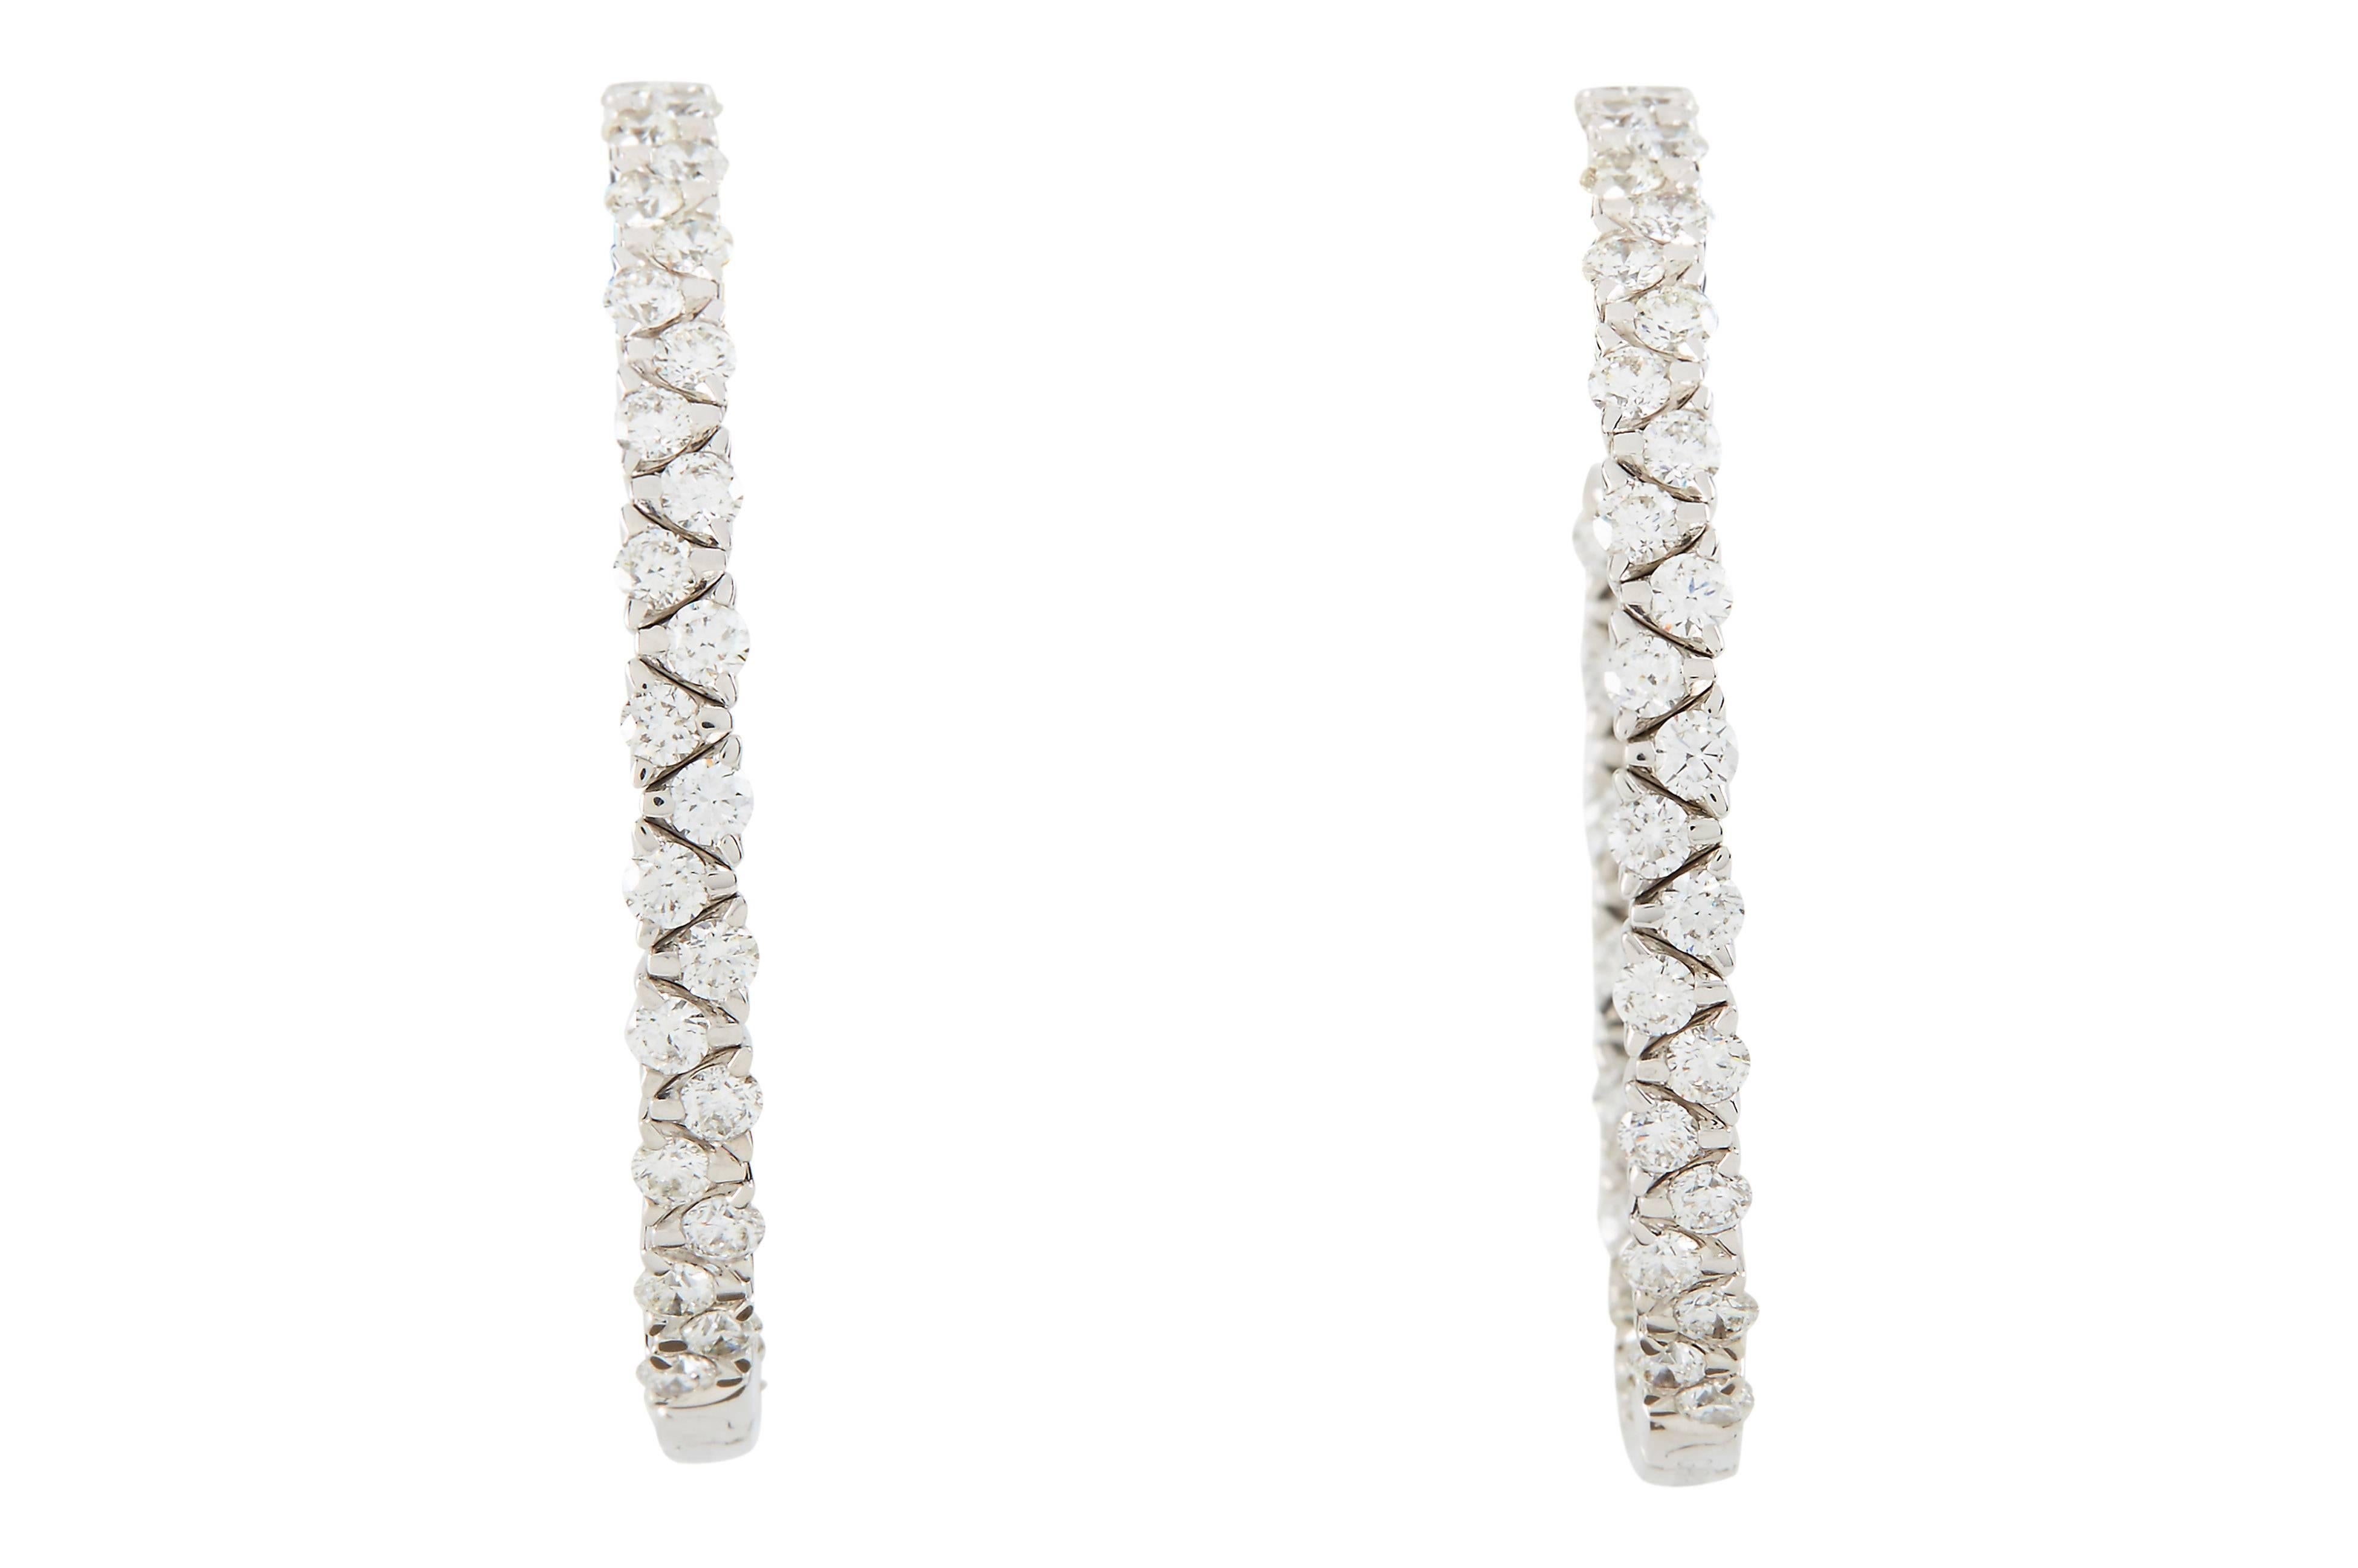 A pair of 18k white gold inside-out diamond hoop earrings set with 8.02 carats, total weight, of round brilliant-cut G/VS  diamonds.
The posts are angled to prevent hoops from turning outward, with large friction earring backs. 
The outside